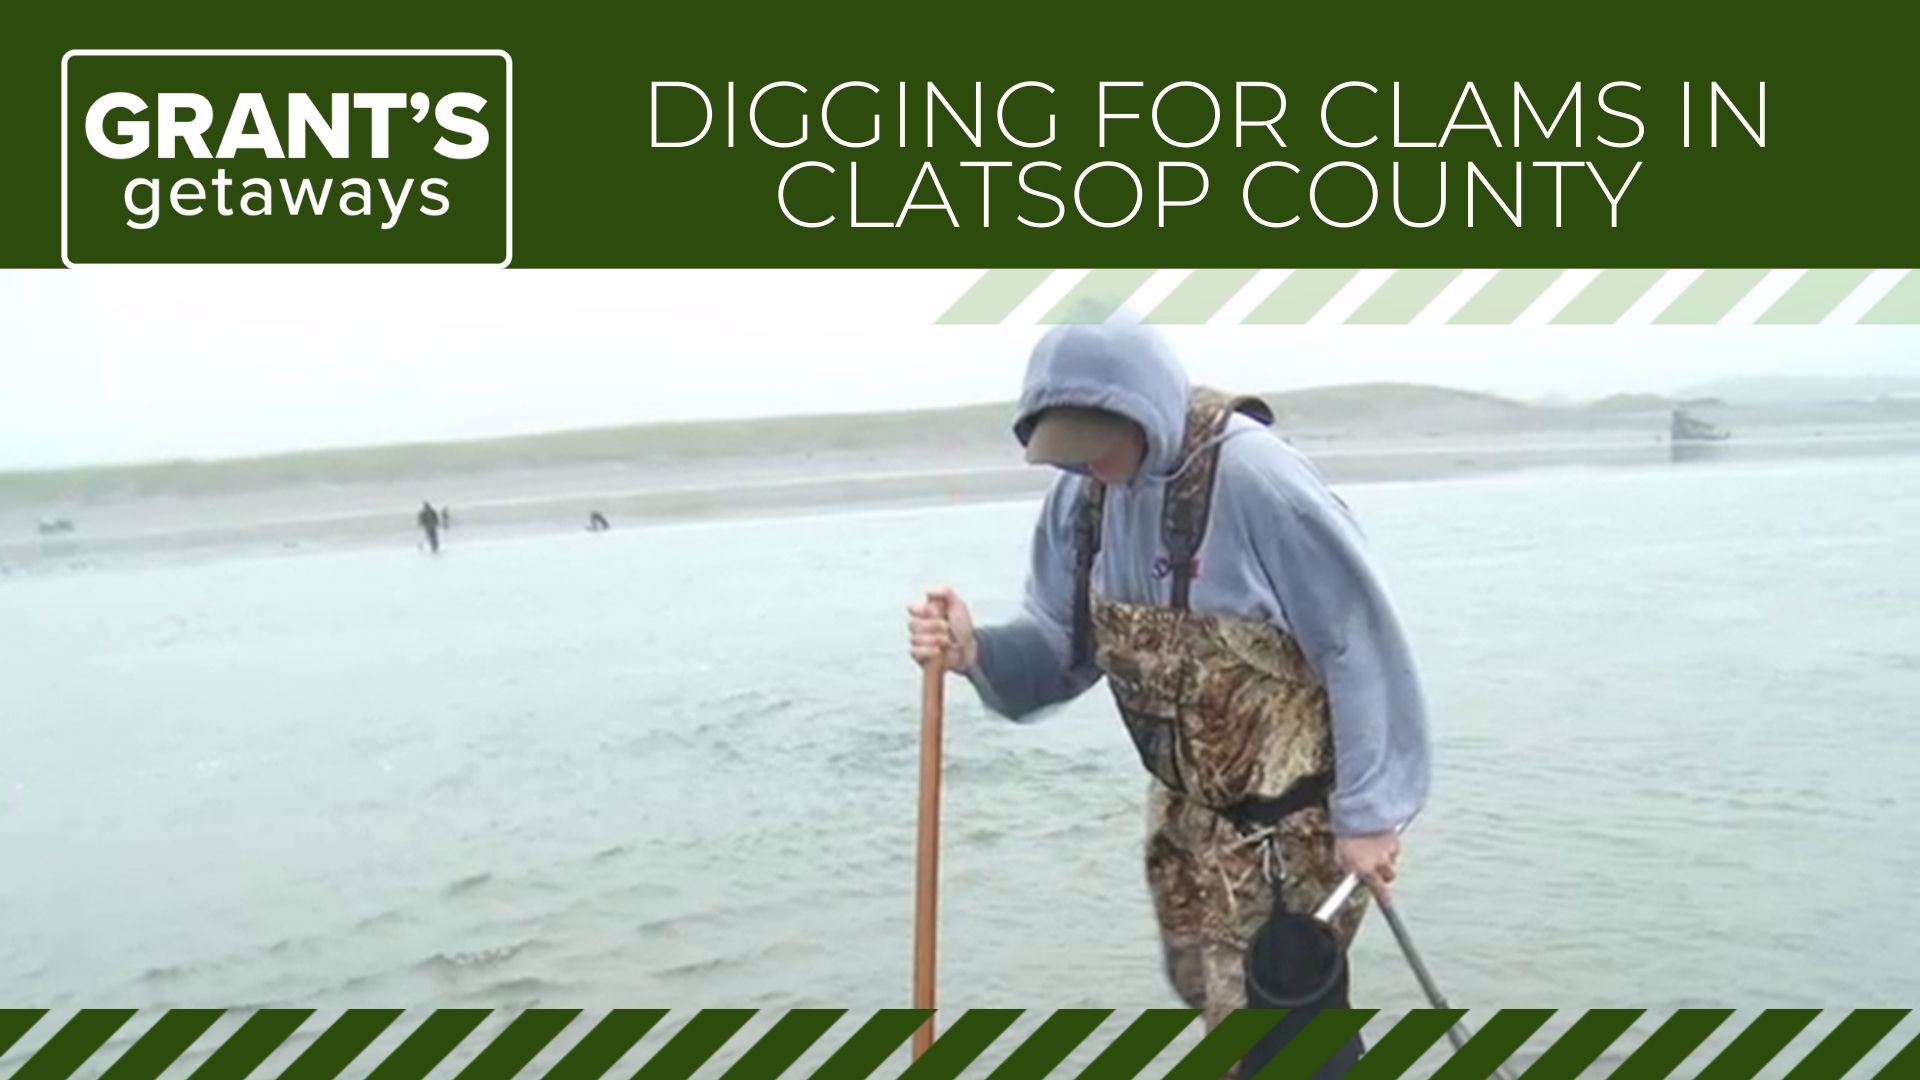 Spring brings the best low tides of the season along the Oregon coast, drawing thousands of clam diggers to beaches.